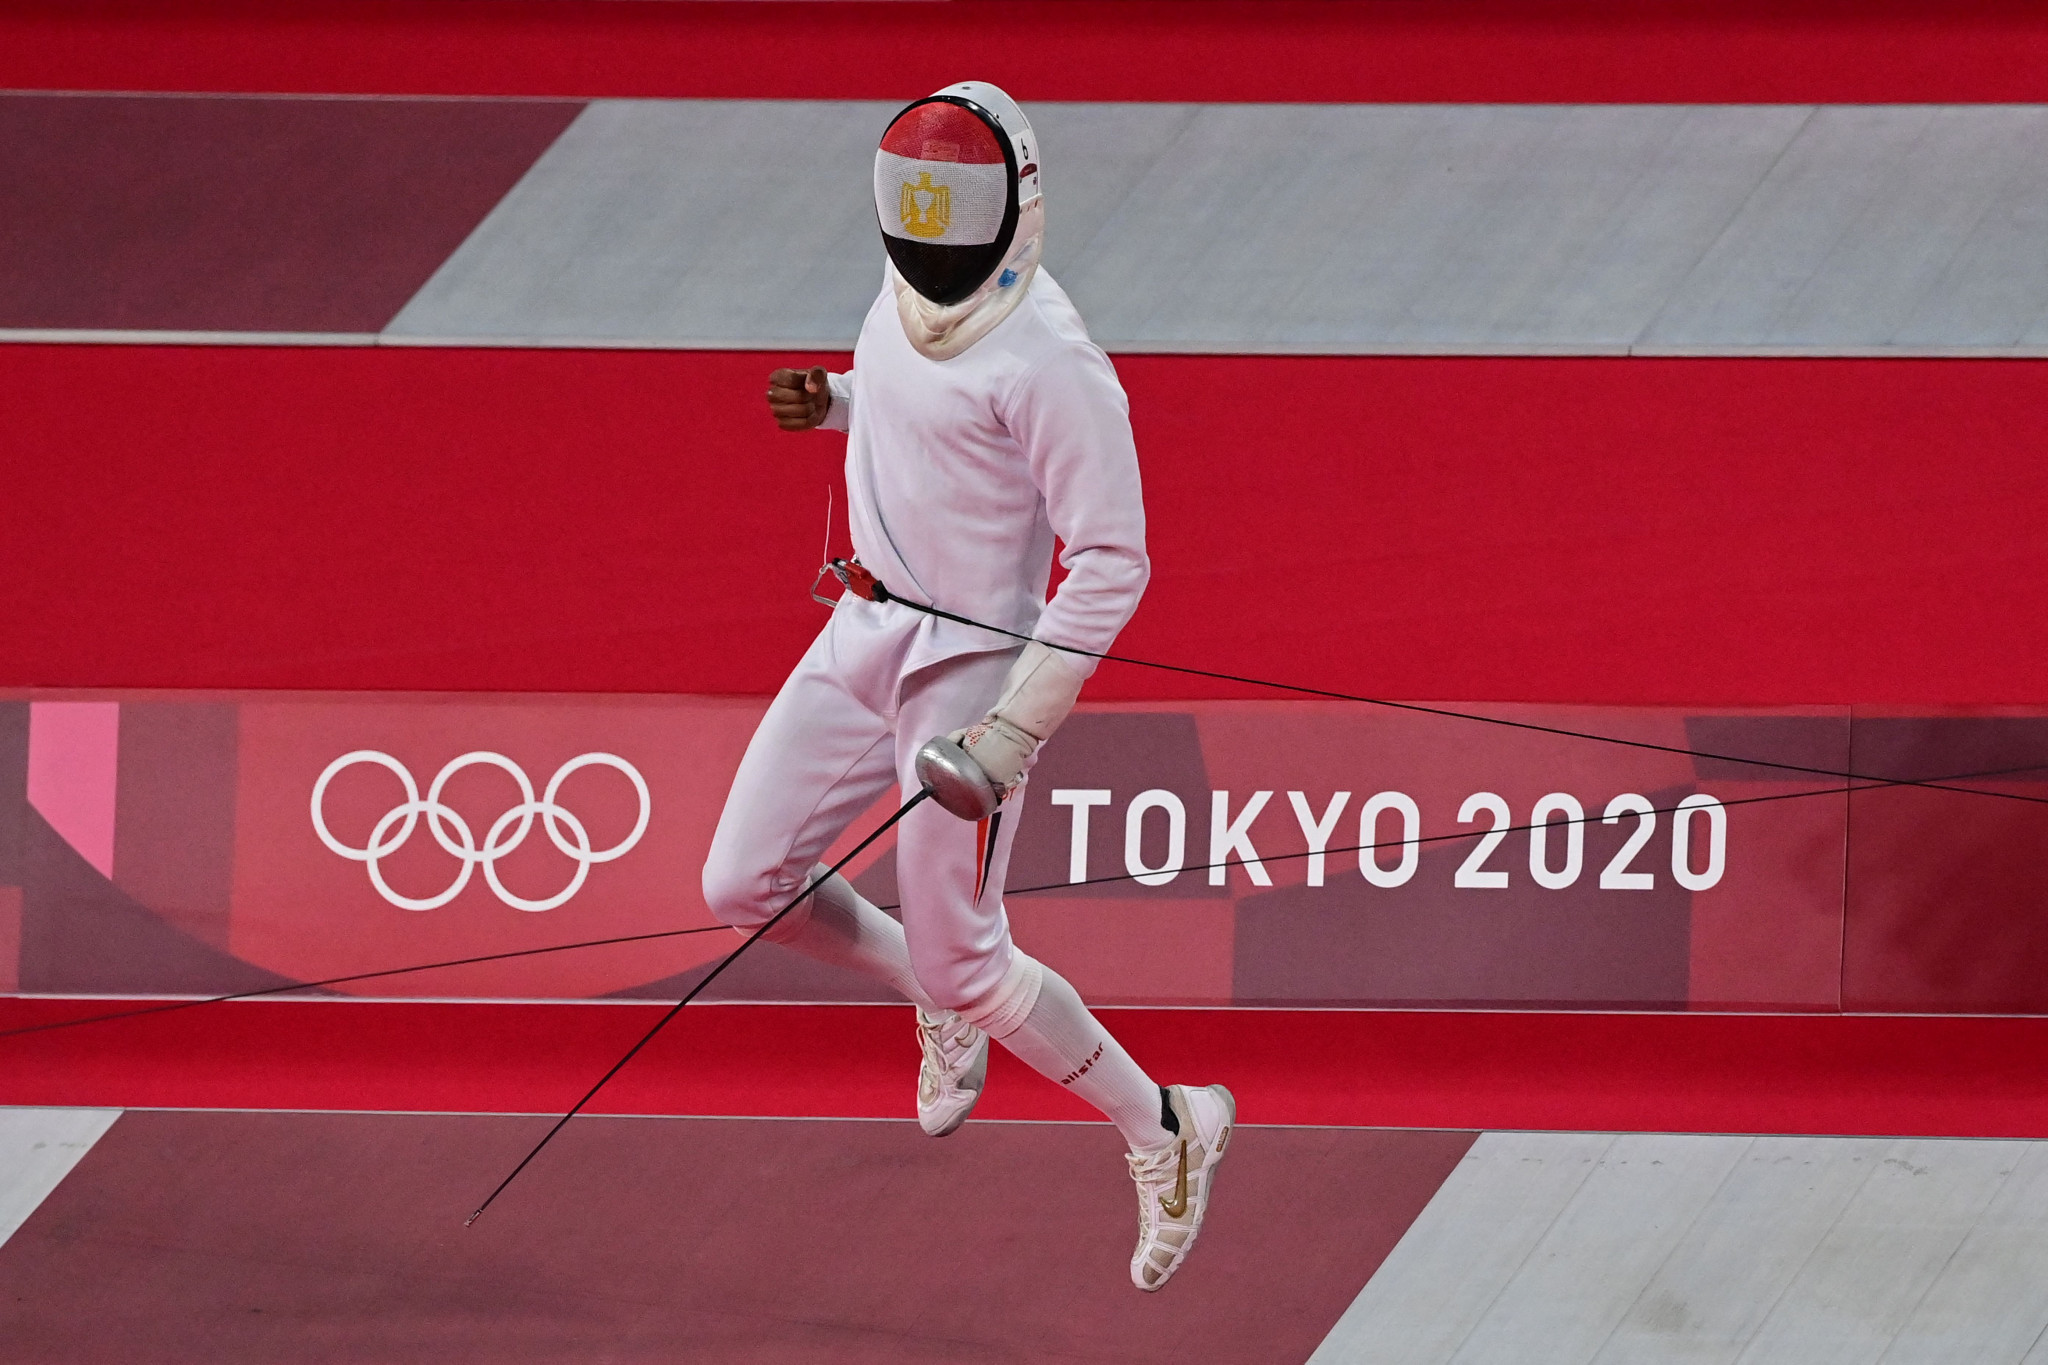 Ahmed Hamed was one of the top qualifiers after finishing second in fencing ©Getty Images